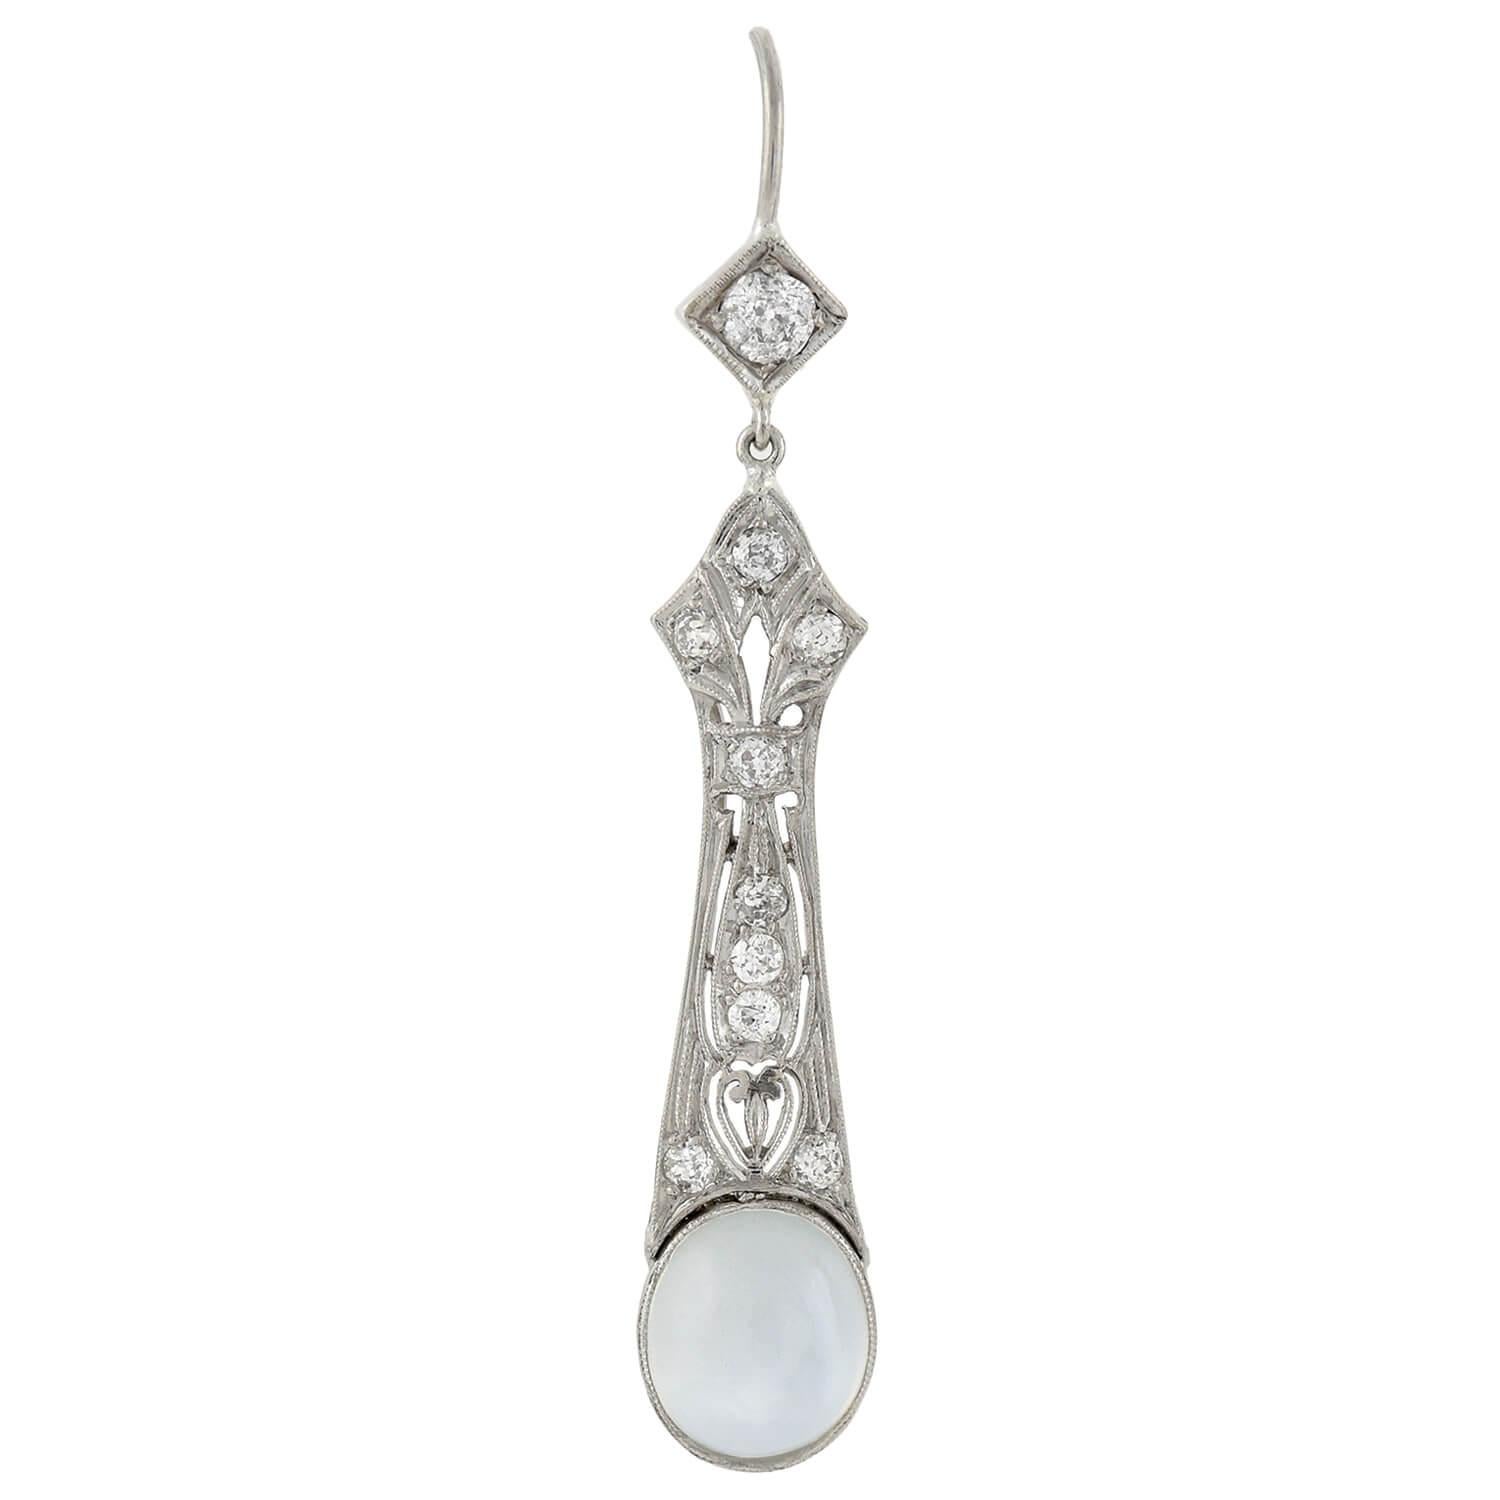 Exquisite moonstone earrings from the late Art Deco (ca1930s) era! These stunning earrings are crafted in platinum and adorned with delicate diamonds and alluring moonstones. With an elongated drop shape, the earrings feature a beautiful bezel set